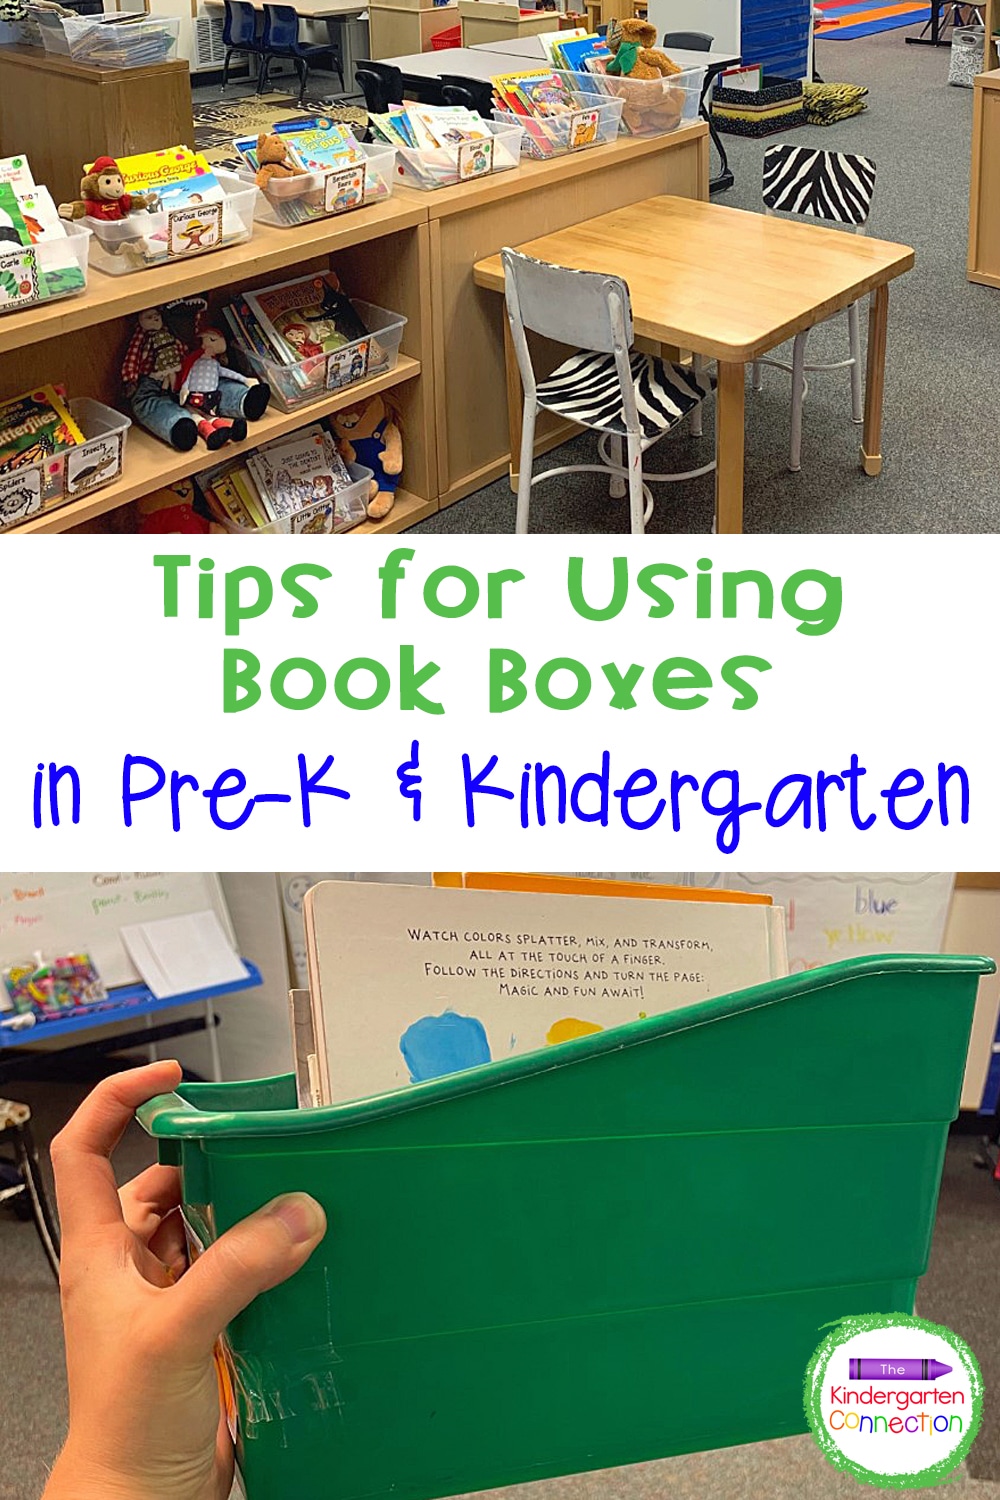 These tips for using book boxes in the classroom will provide tons of book choices for your students while also keeping your library organized!